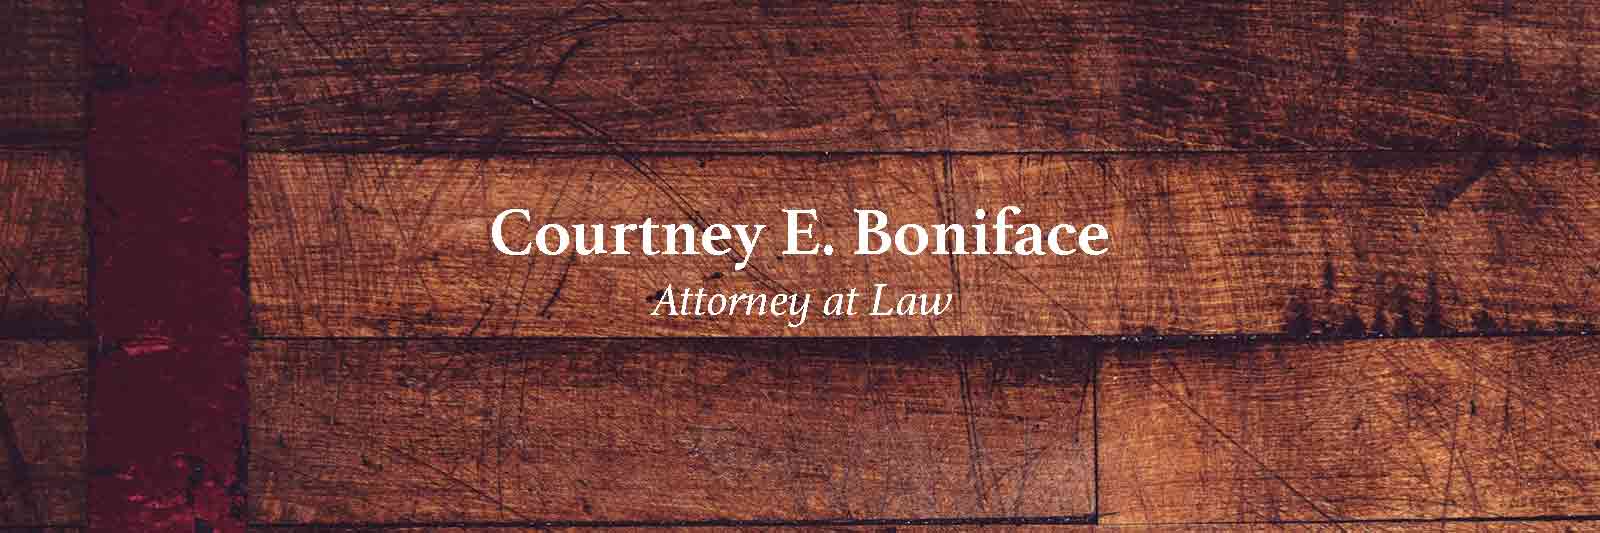 Courtney E. Boniface, Attorney at Law